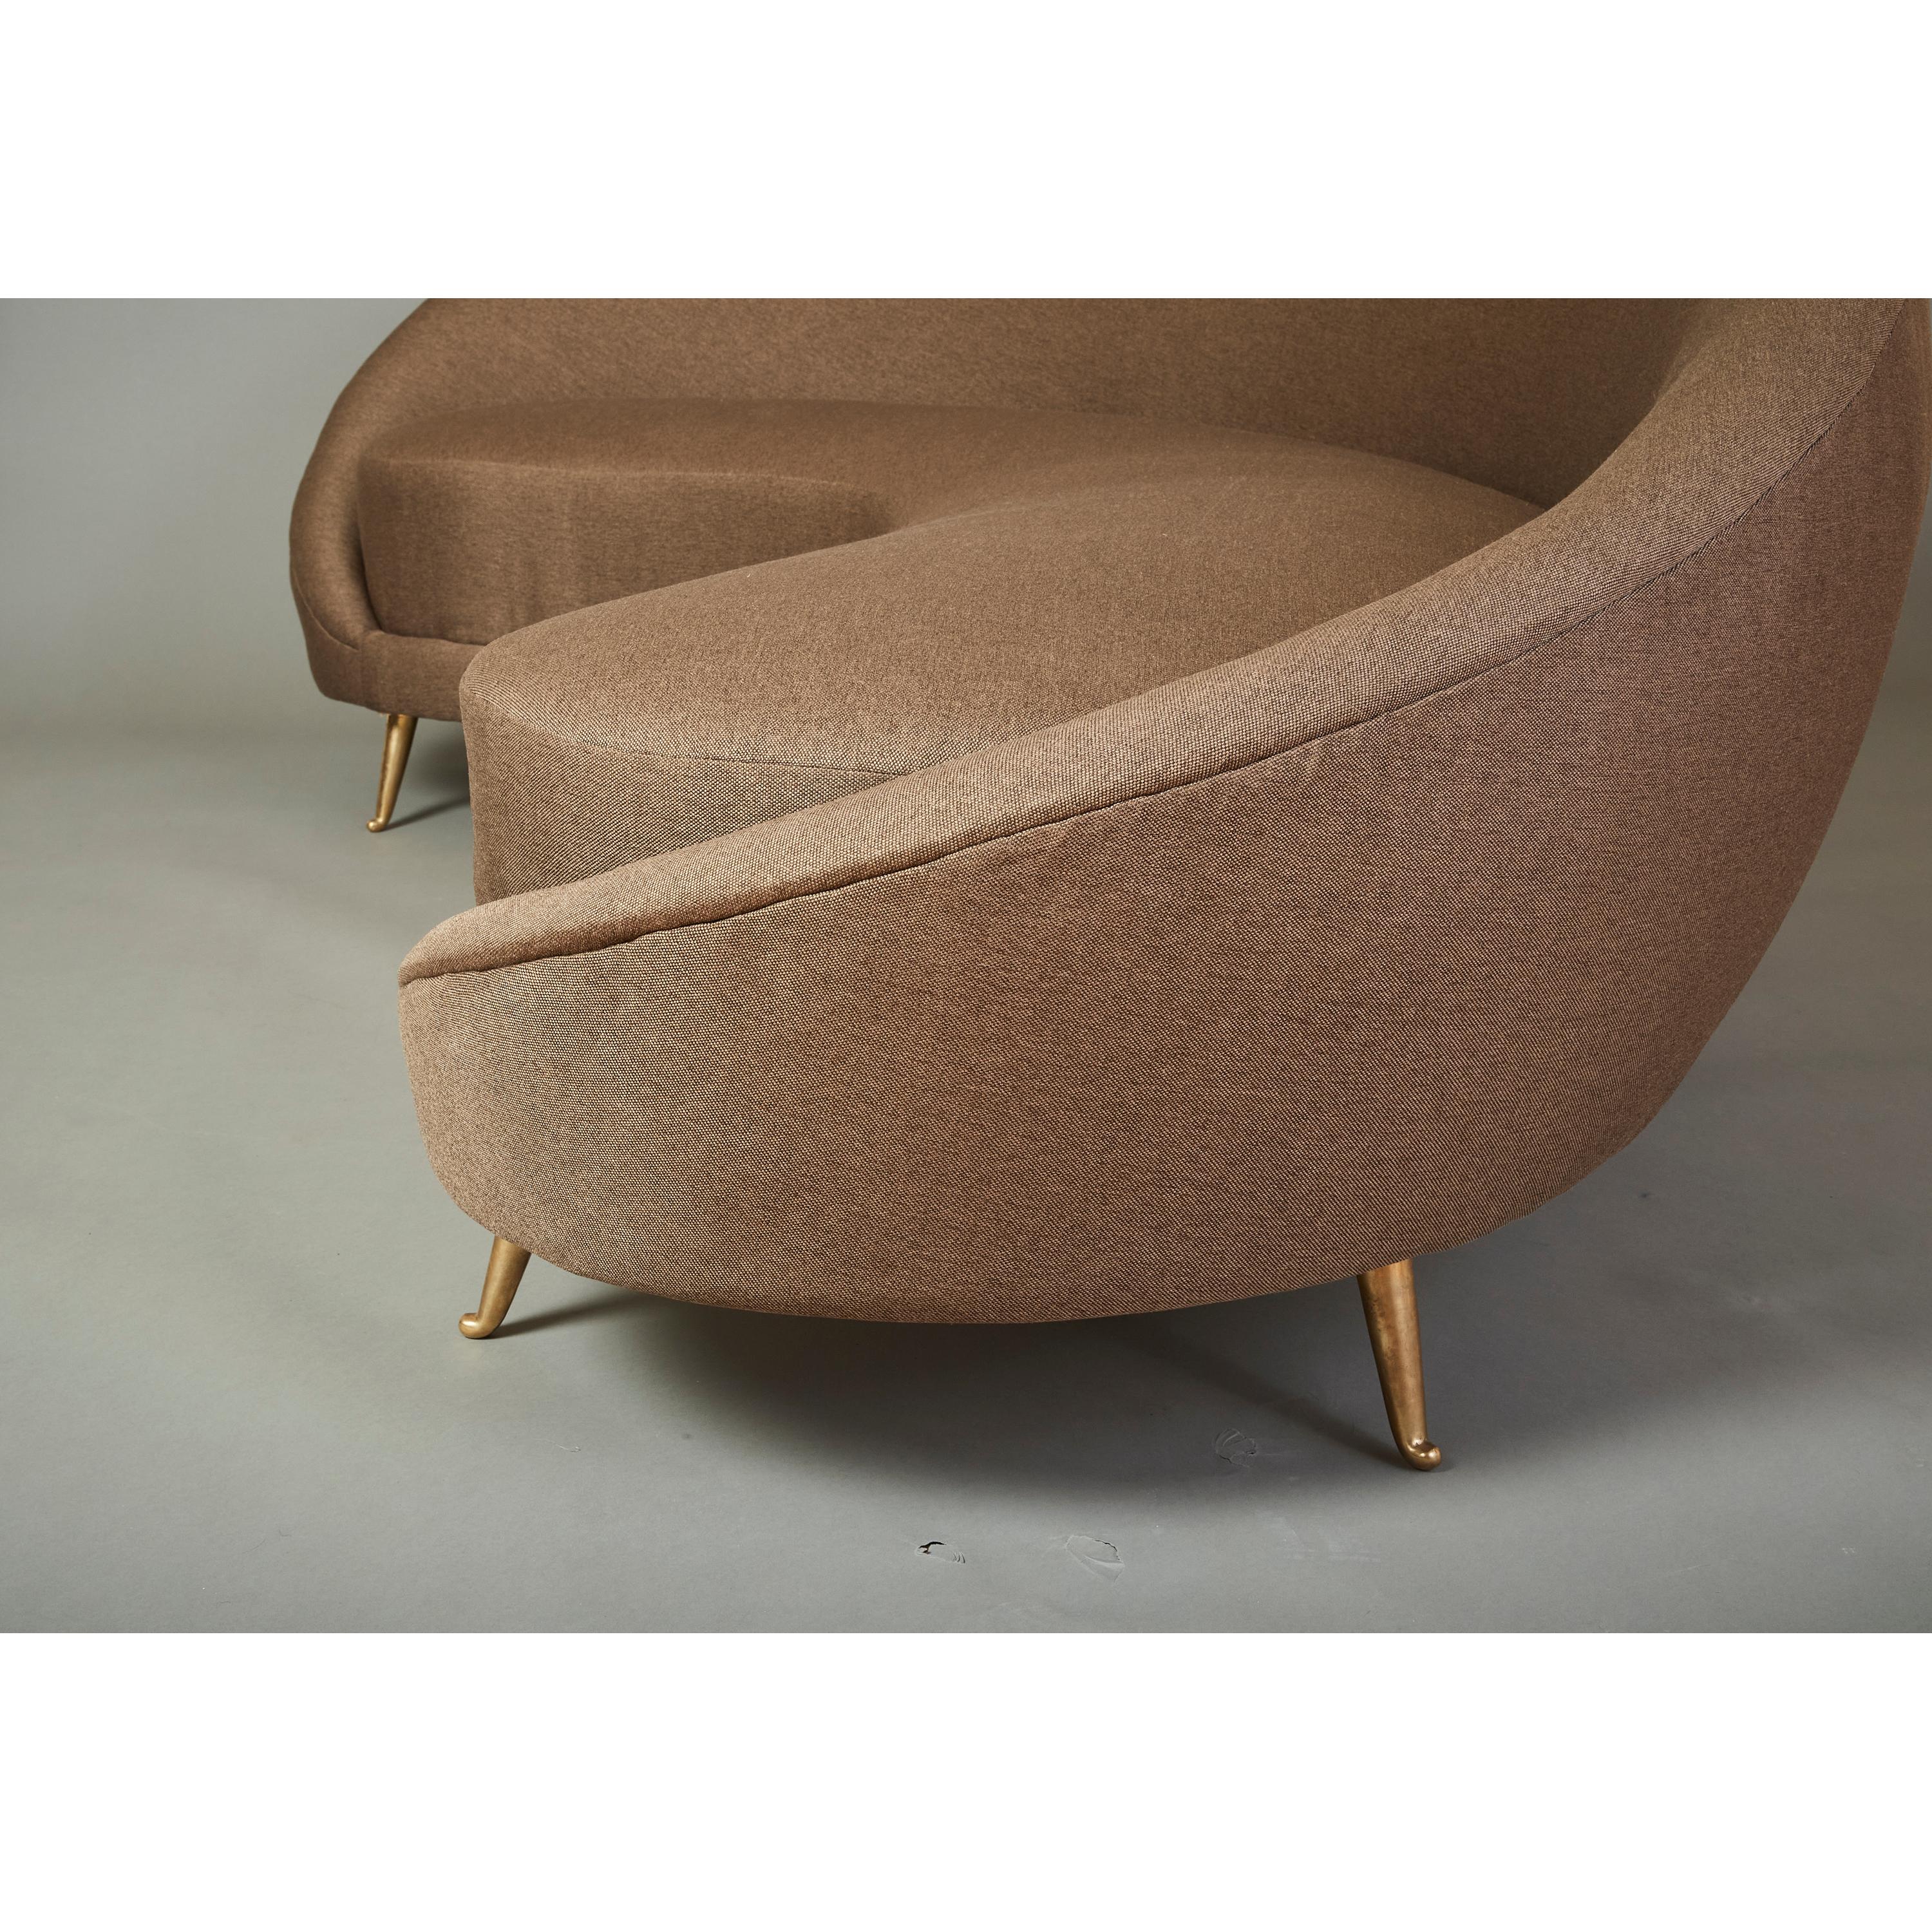 Federico Munari Curved Boomerang Sofa with Polished Brass Legs, Italy 1950's For Sale 11